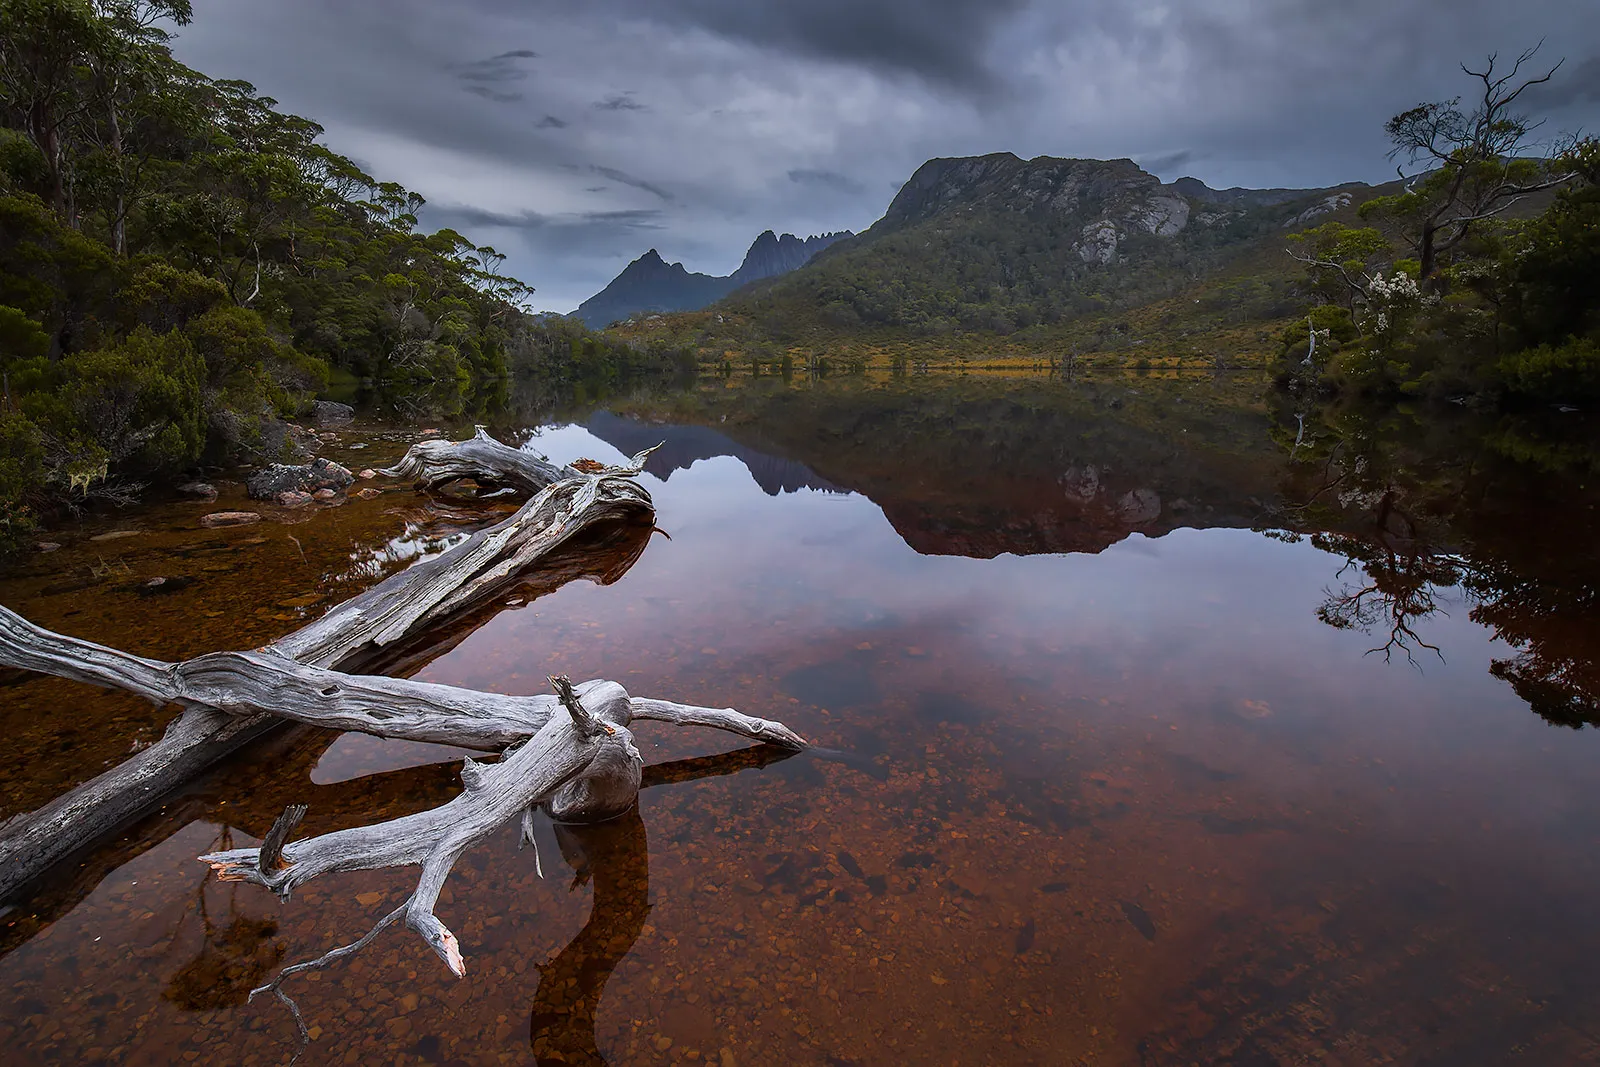 The iconic Cradle Mountain in Tasmania reflected in Wombat Pool, one of several lakes in Cradle Mountain-Lake St Clair National Park.